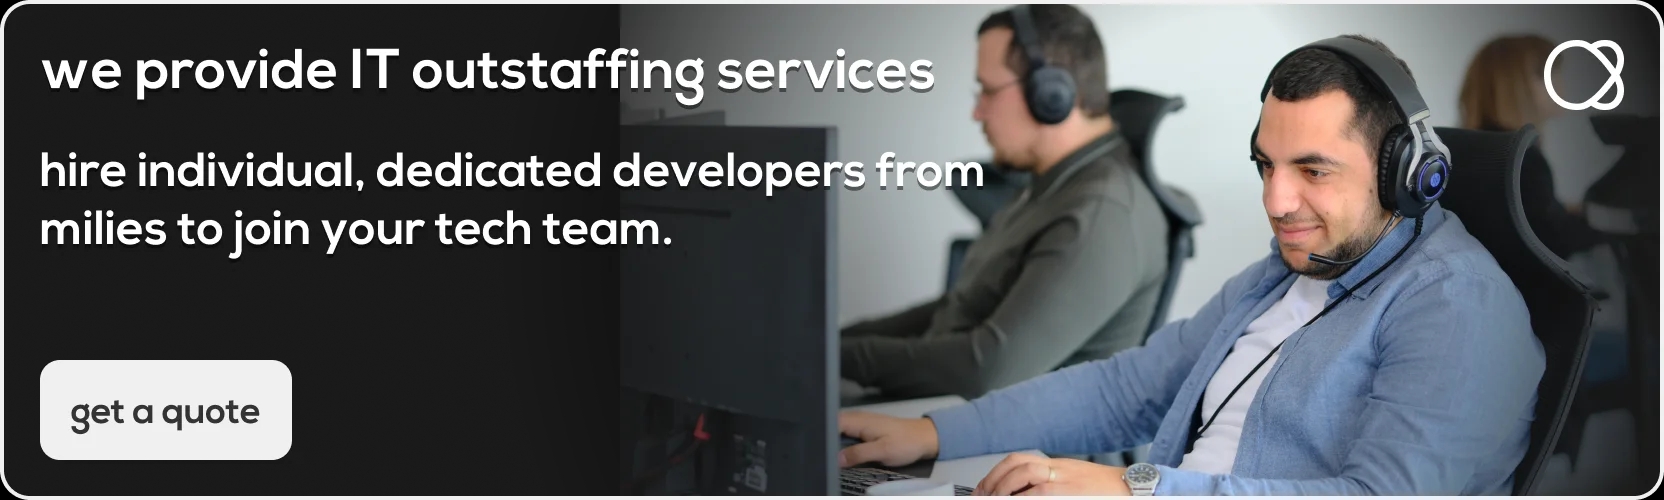 Hire dedicated developers to join your tech team